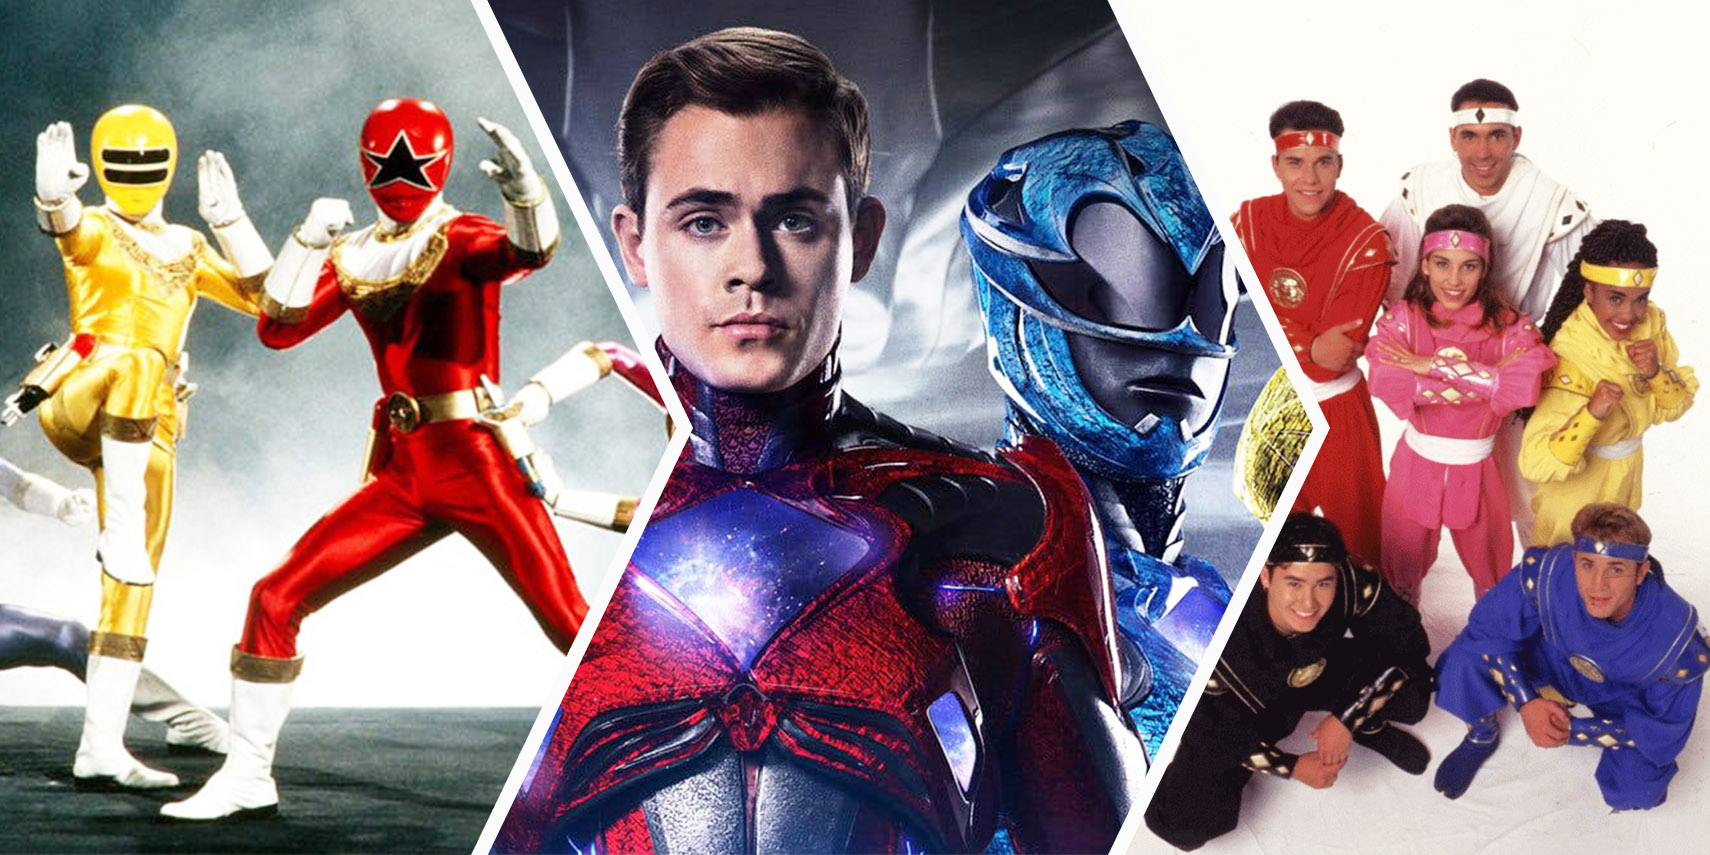 Which Power Rangers are the strongest?